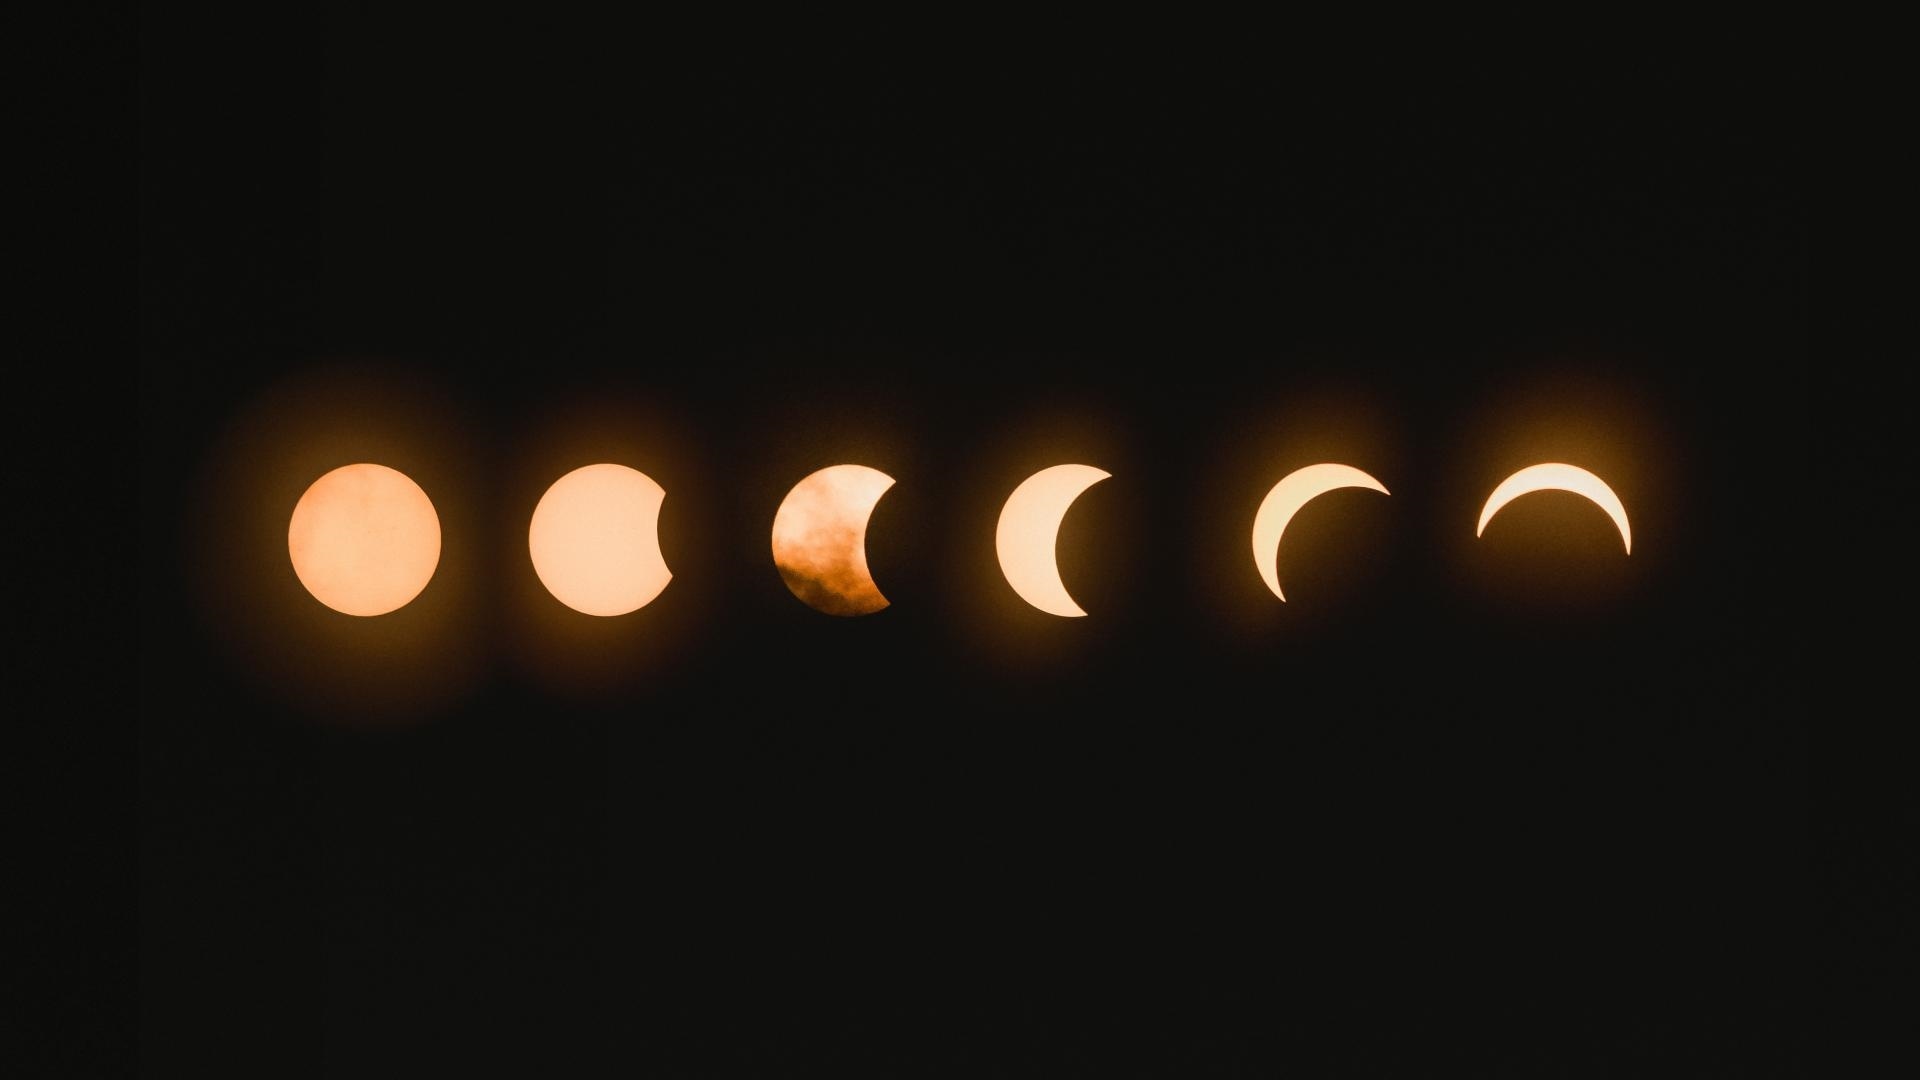 Moon Phases wallpaper